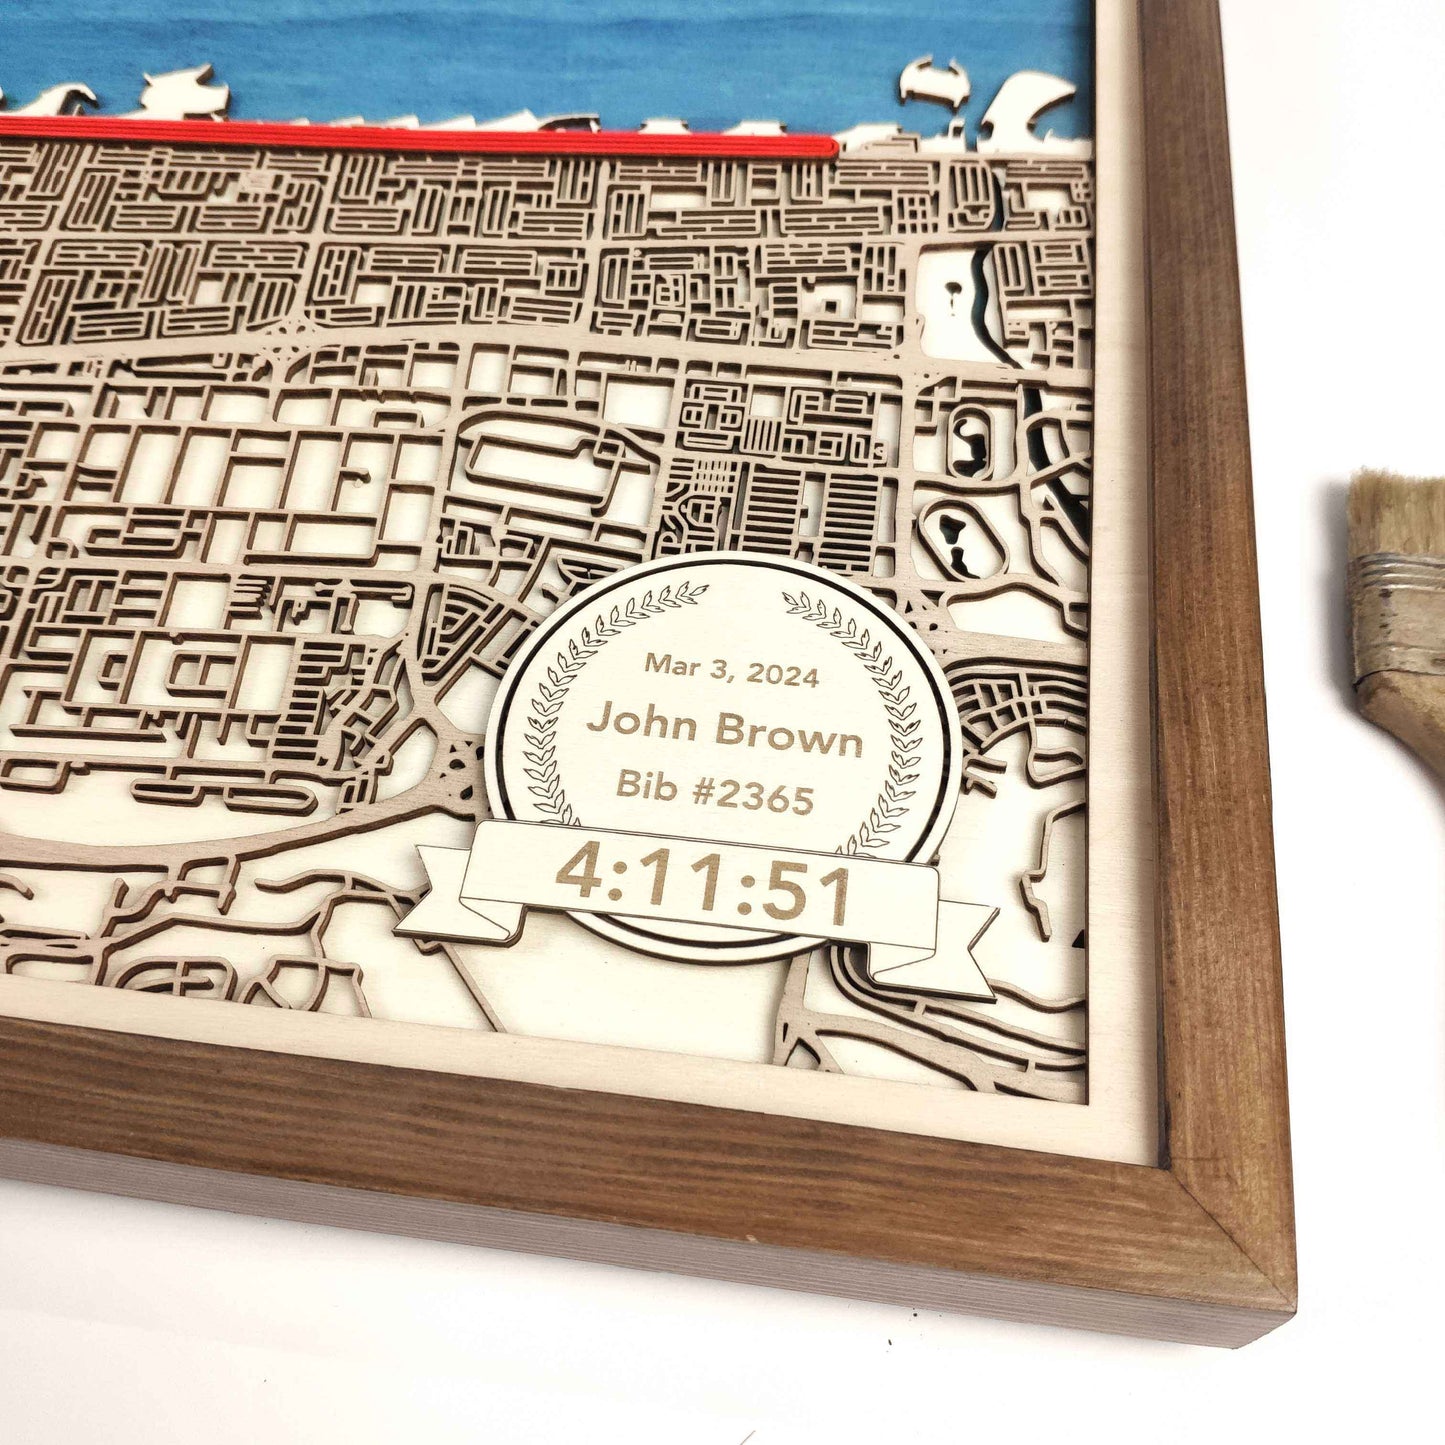 Dubai Marathon Commemorative Wooden Route Map – Collector's Item by CityWood - Custom Wood Map Art - Unique Laser Cut Engraved - Anniversary Gift